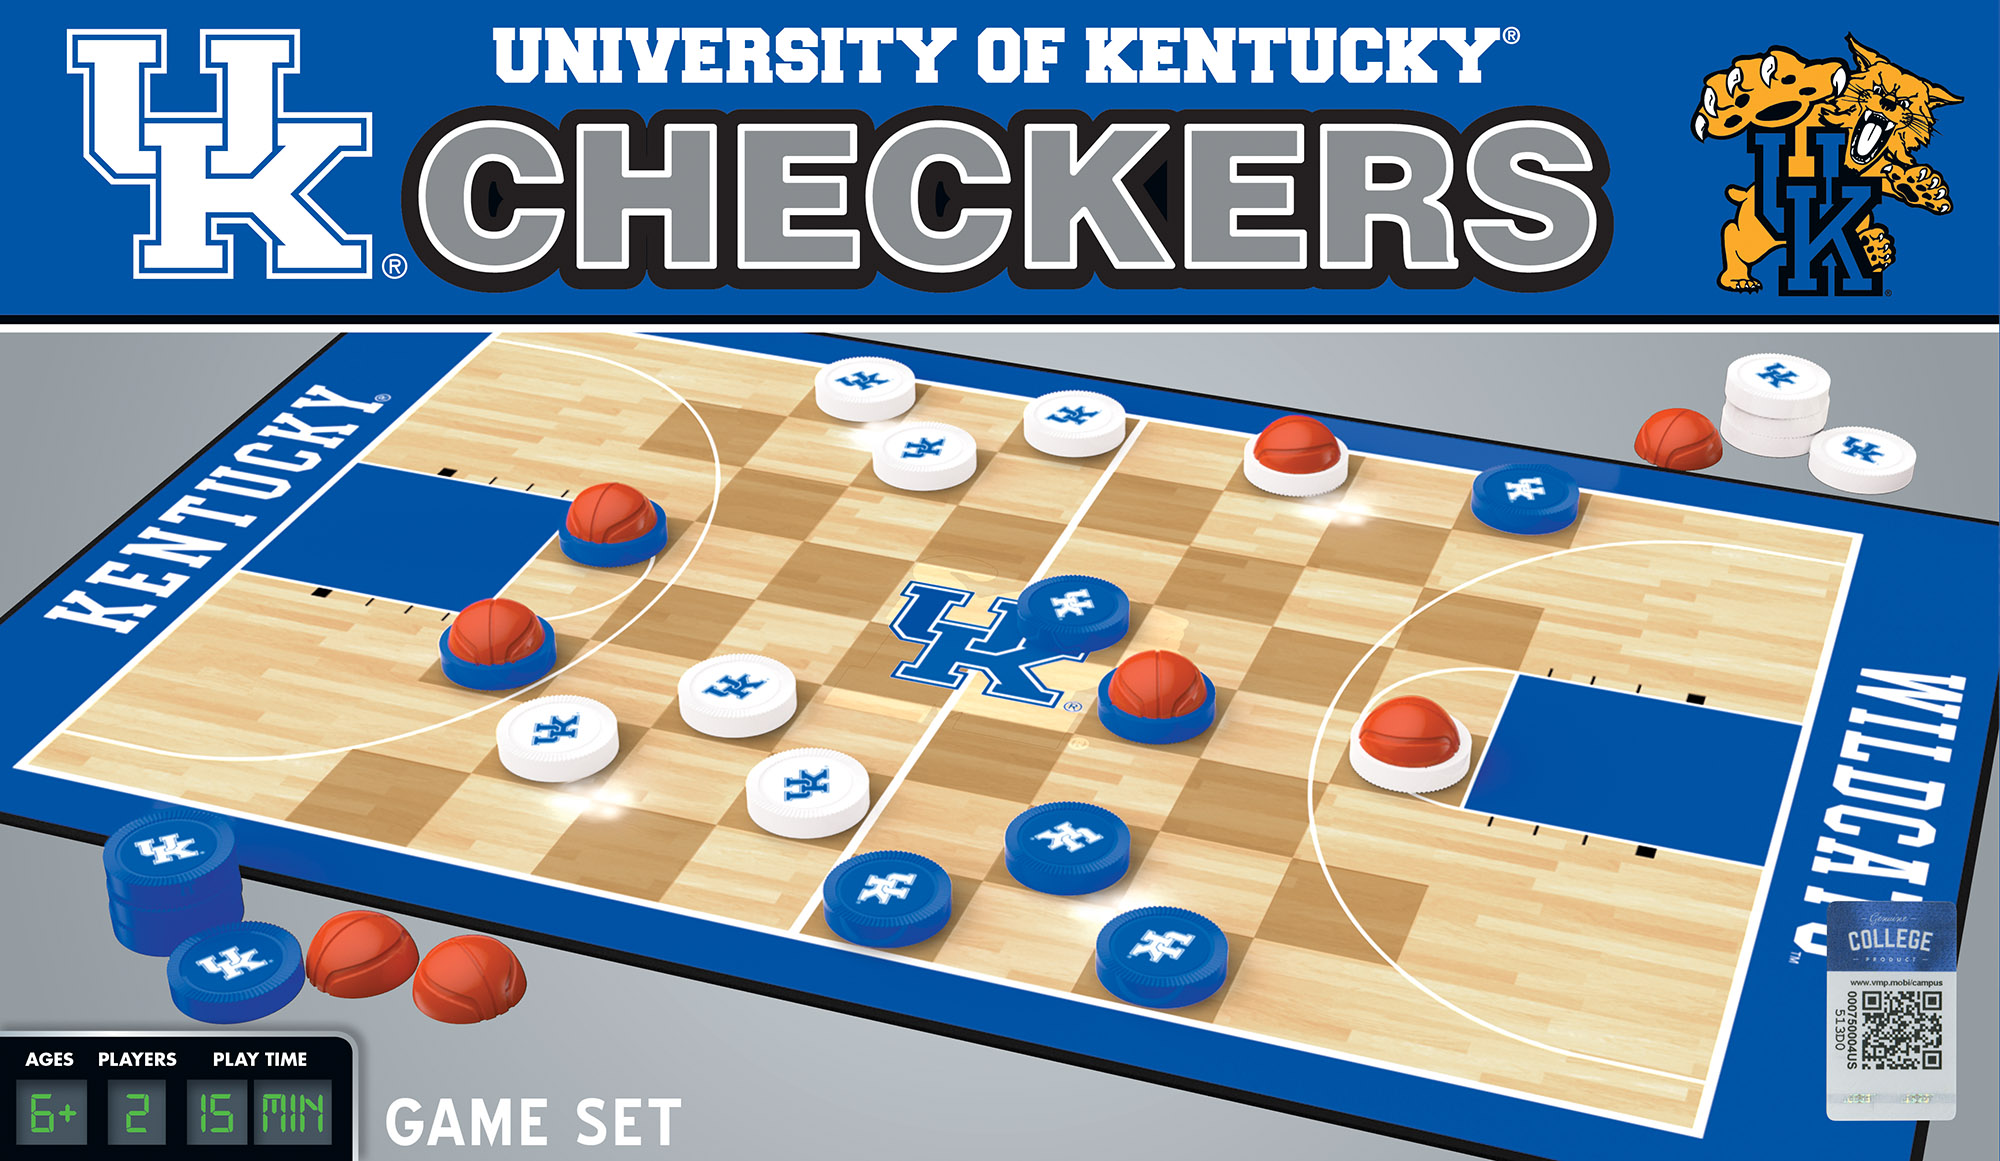 MasterPieces Officially licensed NCAA Kentucky Wildcats Checkers Board Game for Families and Kids ages 6 and Up - image 1 of 5